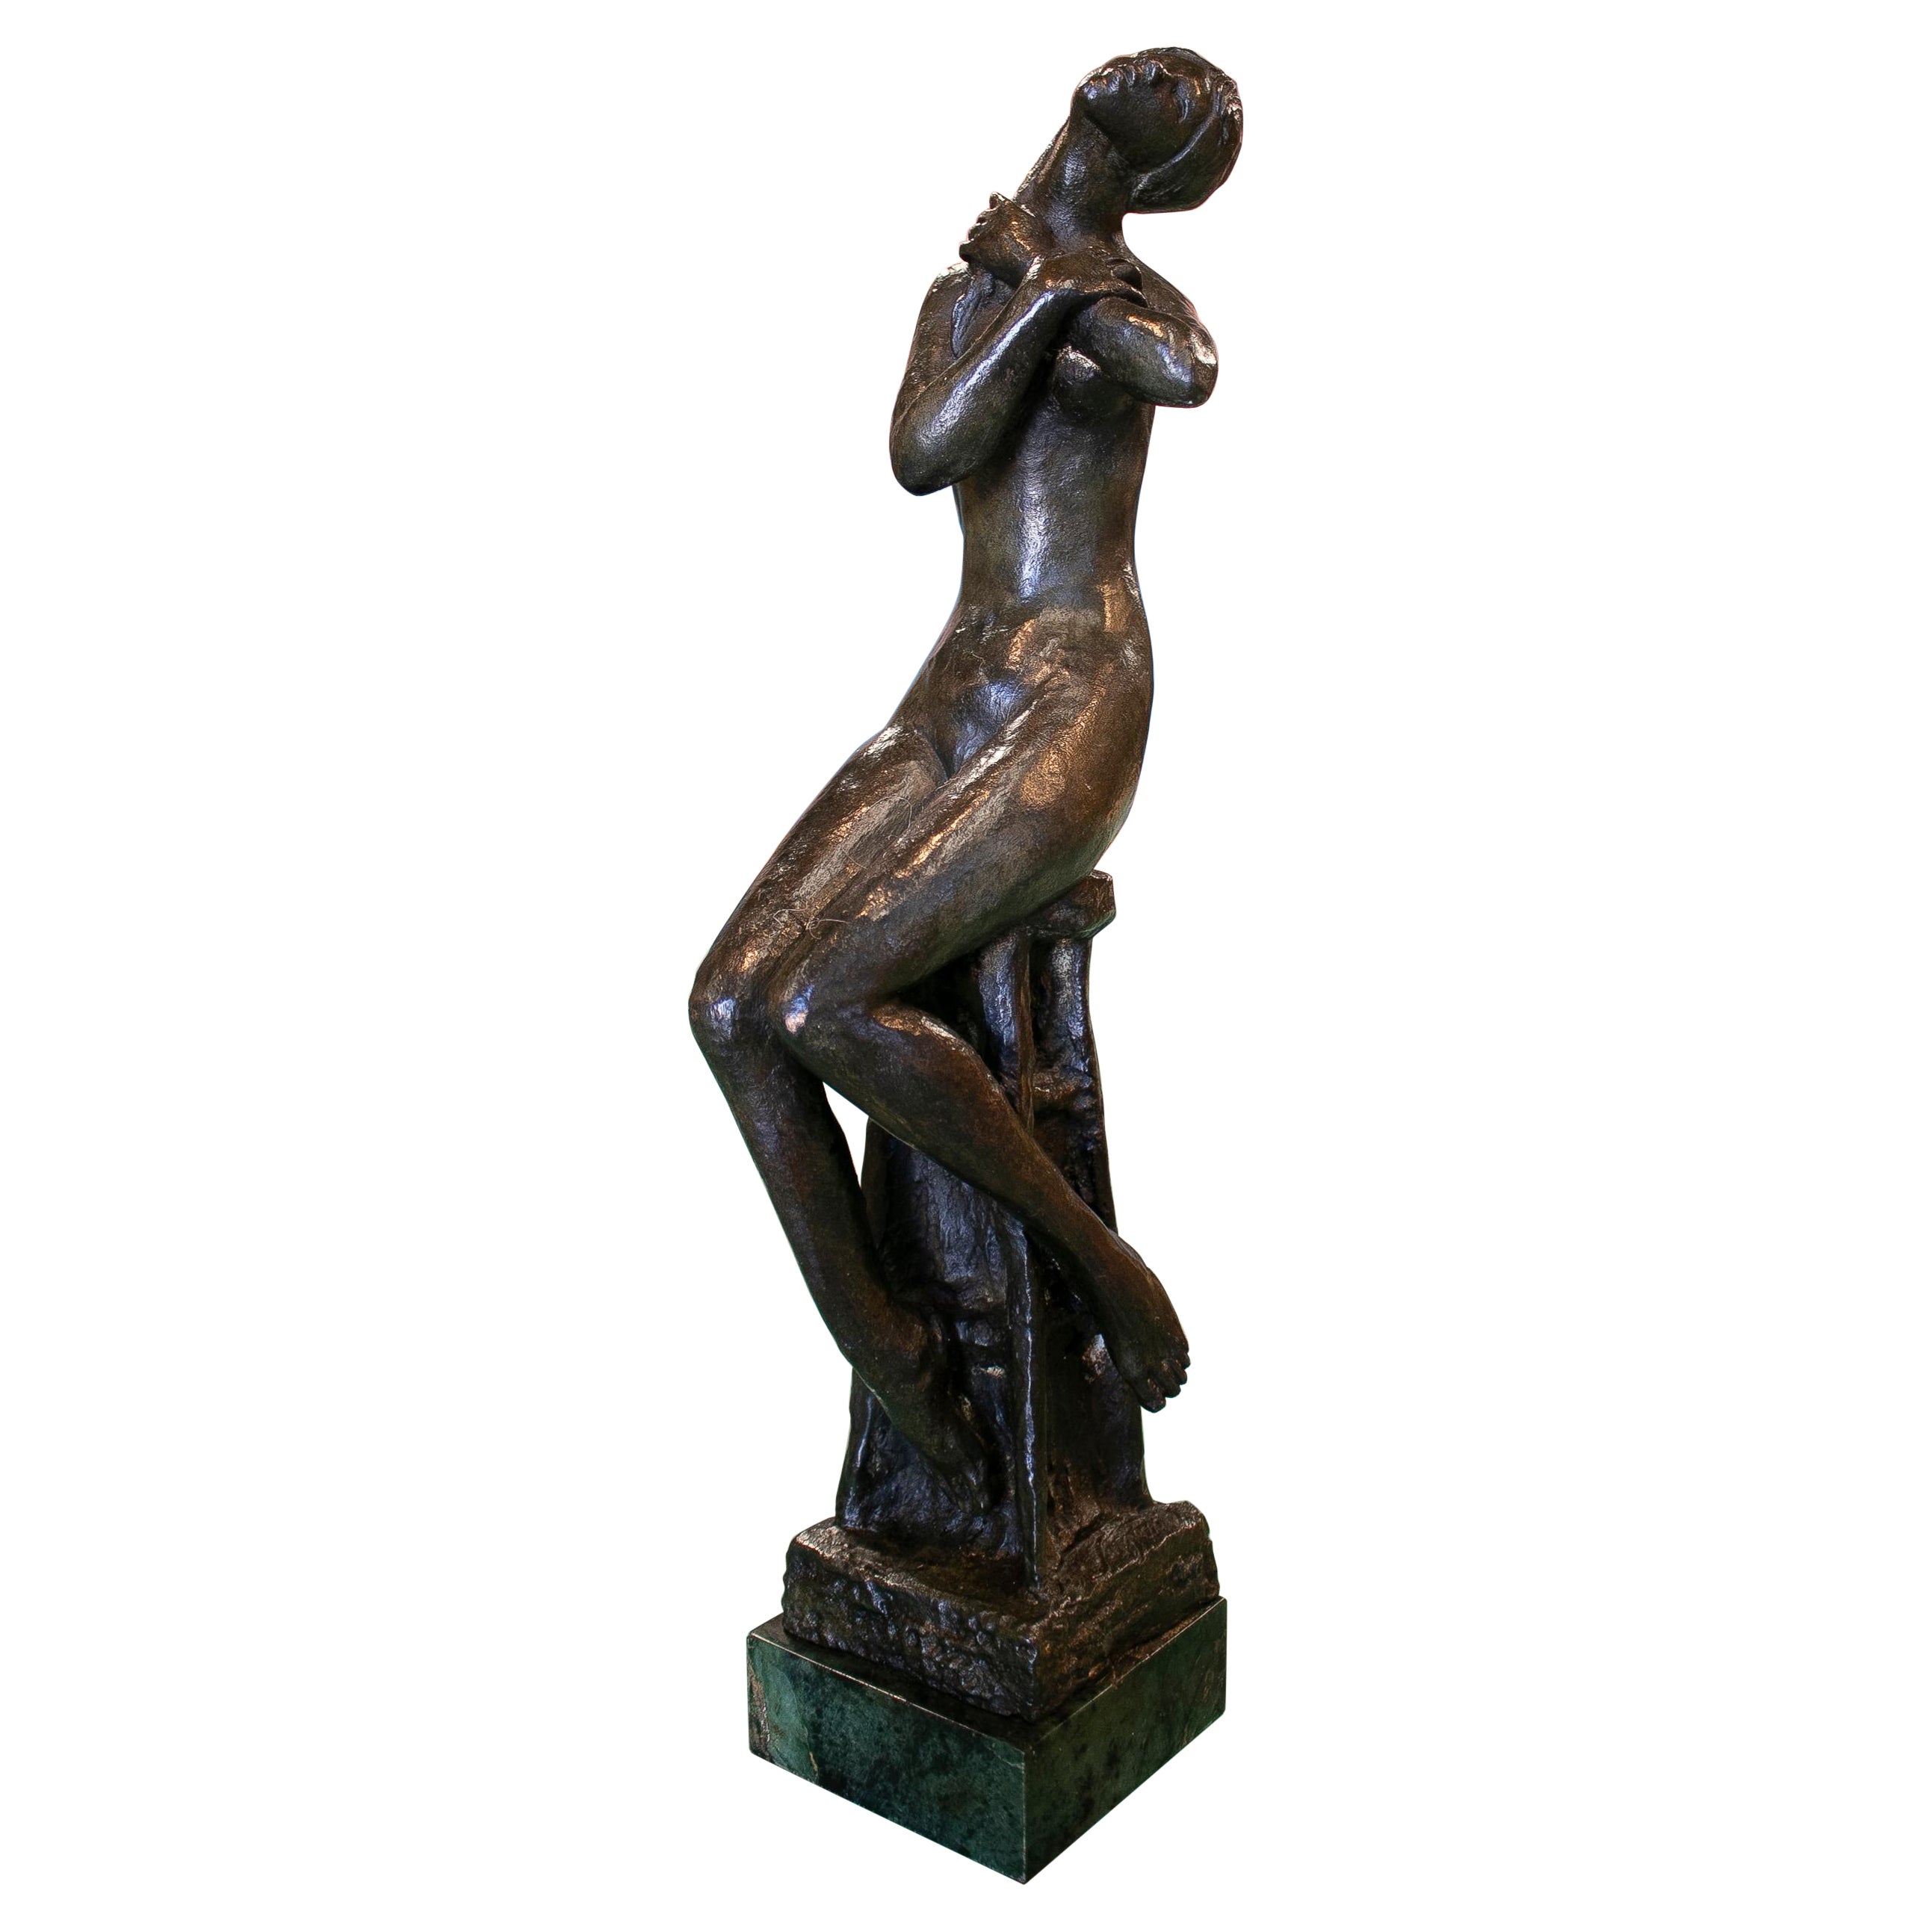 1980s Spanish Woman Bronze Figure w/ Marble Base Signed "Sanguino" For Sale